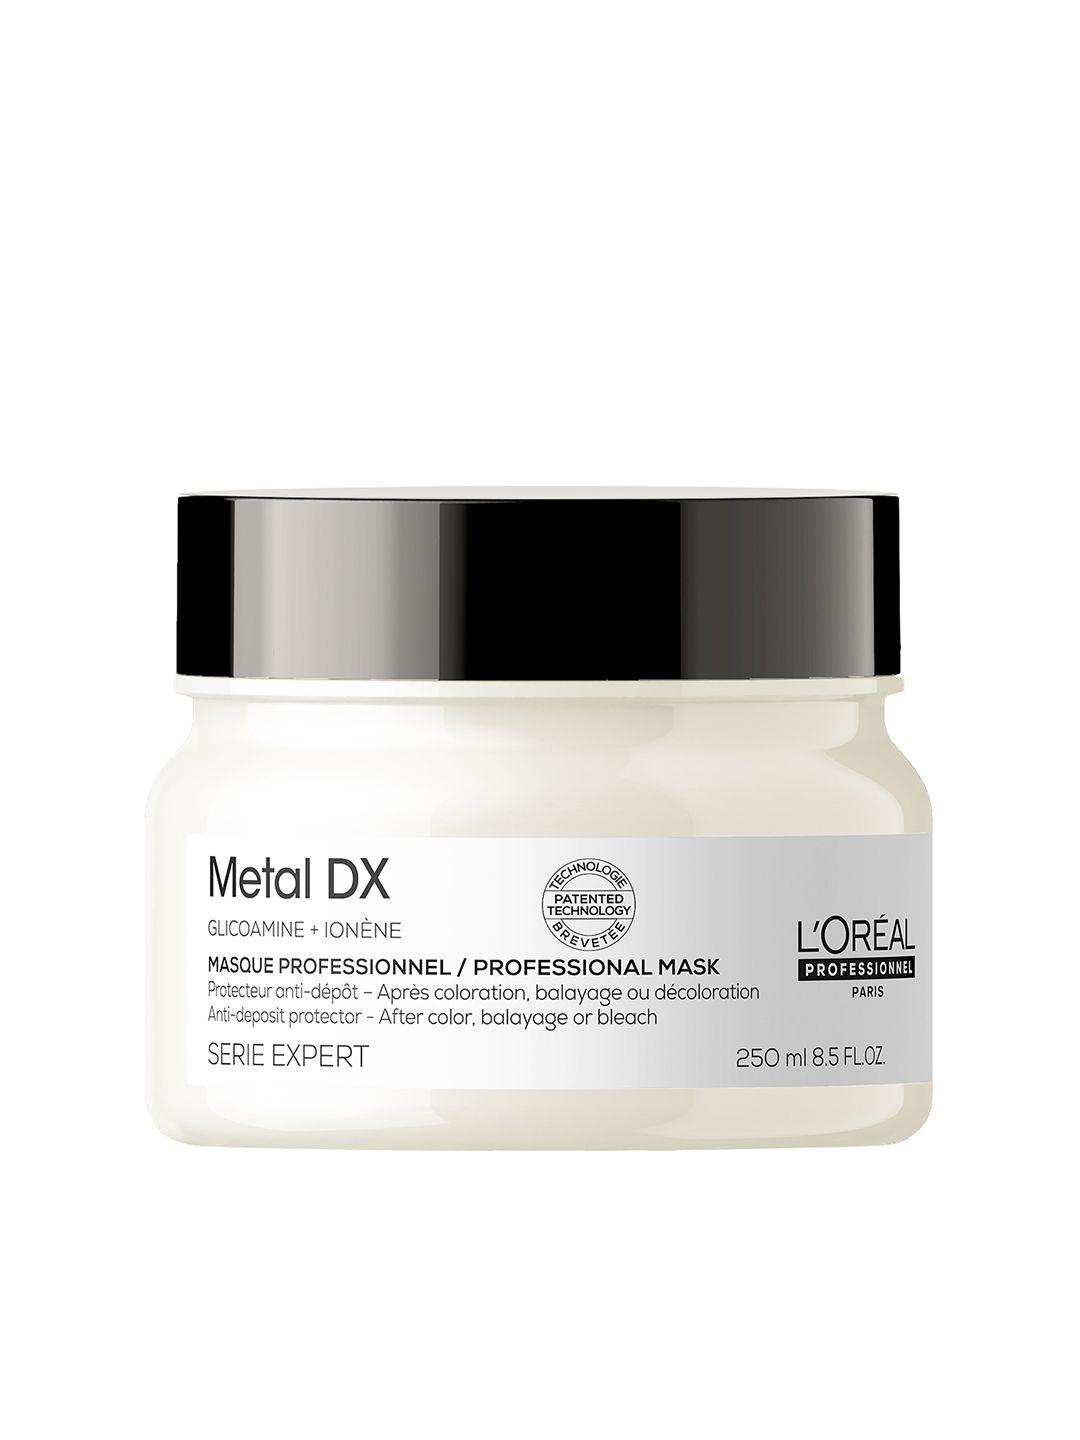 loreal-professionnel-metal-dx-anti-deposit-protector-mask-with-glicoamine---250-ml